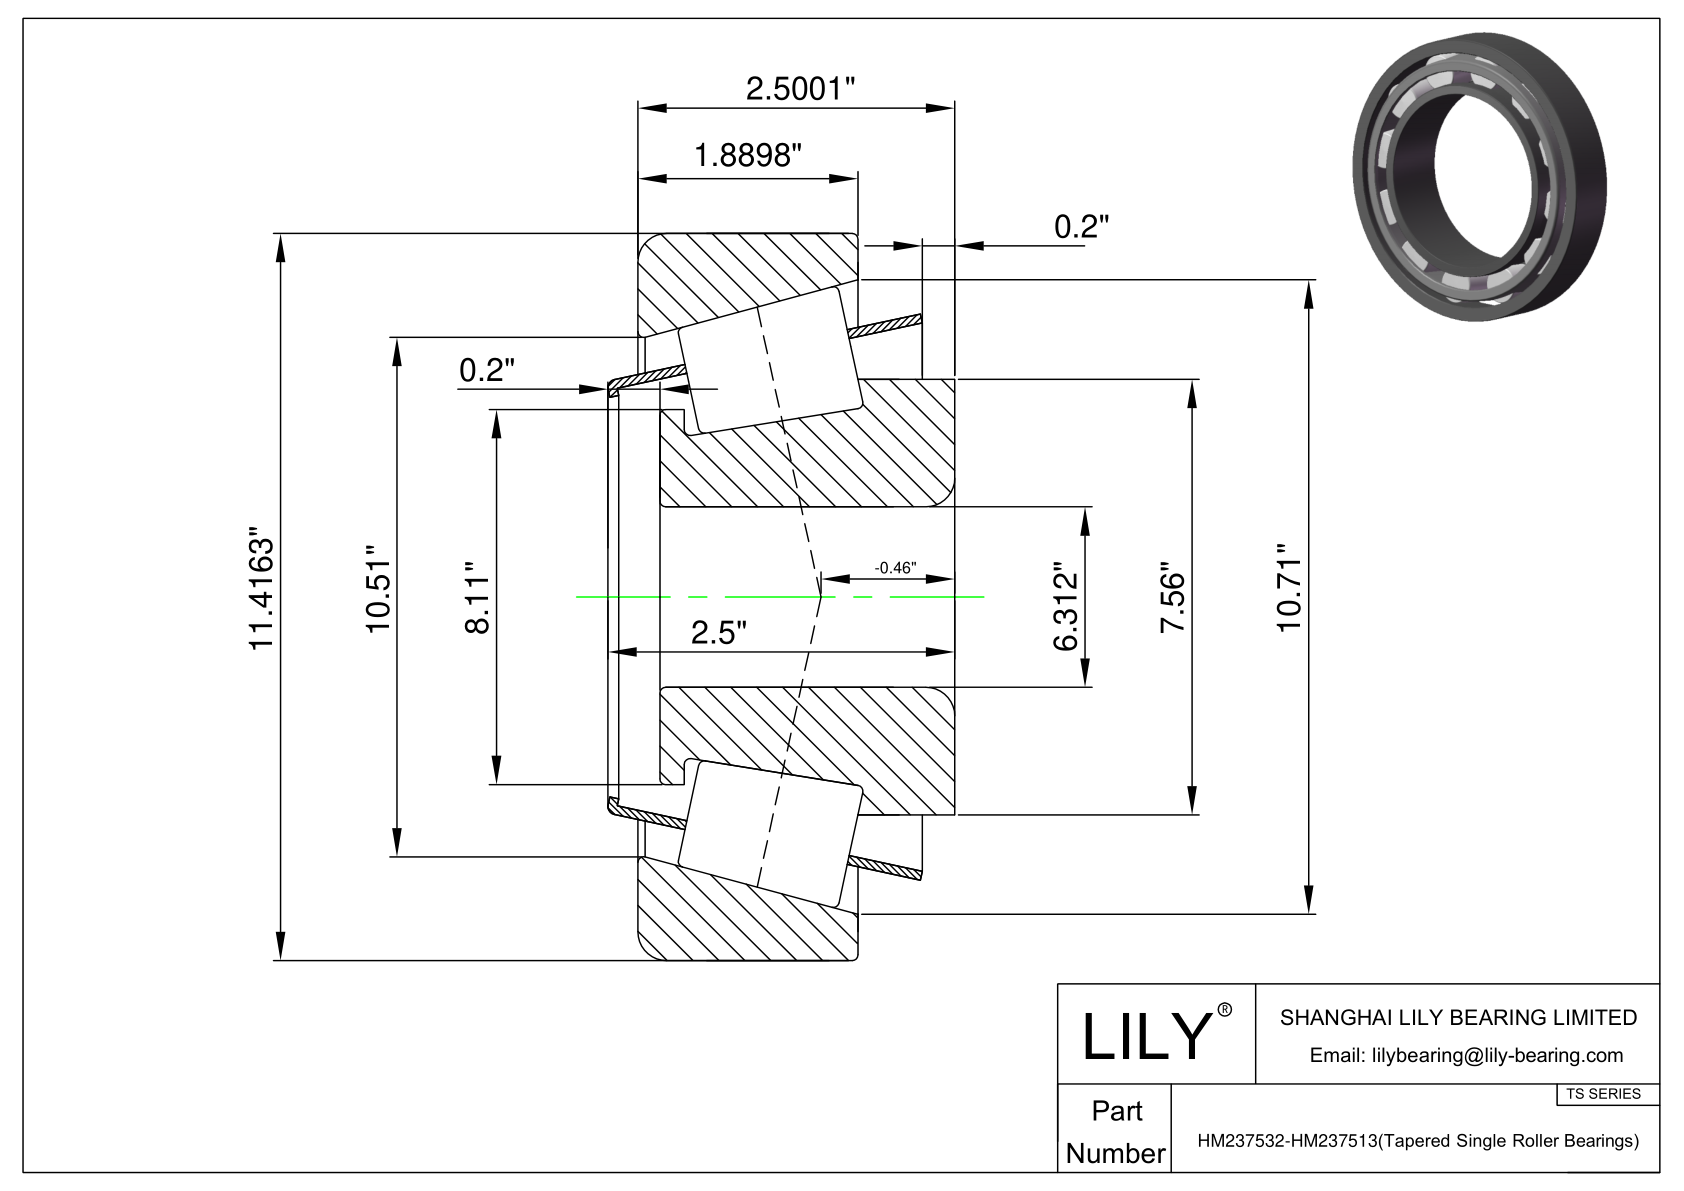 HM237532-HM237513 TS (Tapered Single Roller Bearings) (Imperial) cad drawing